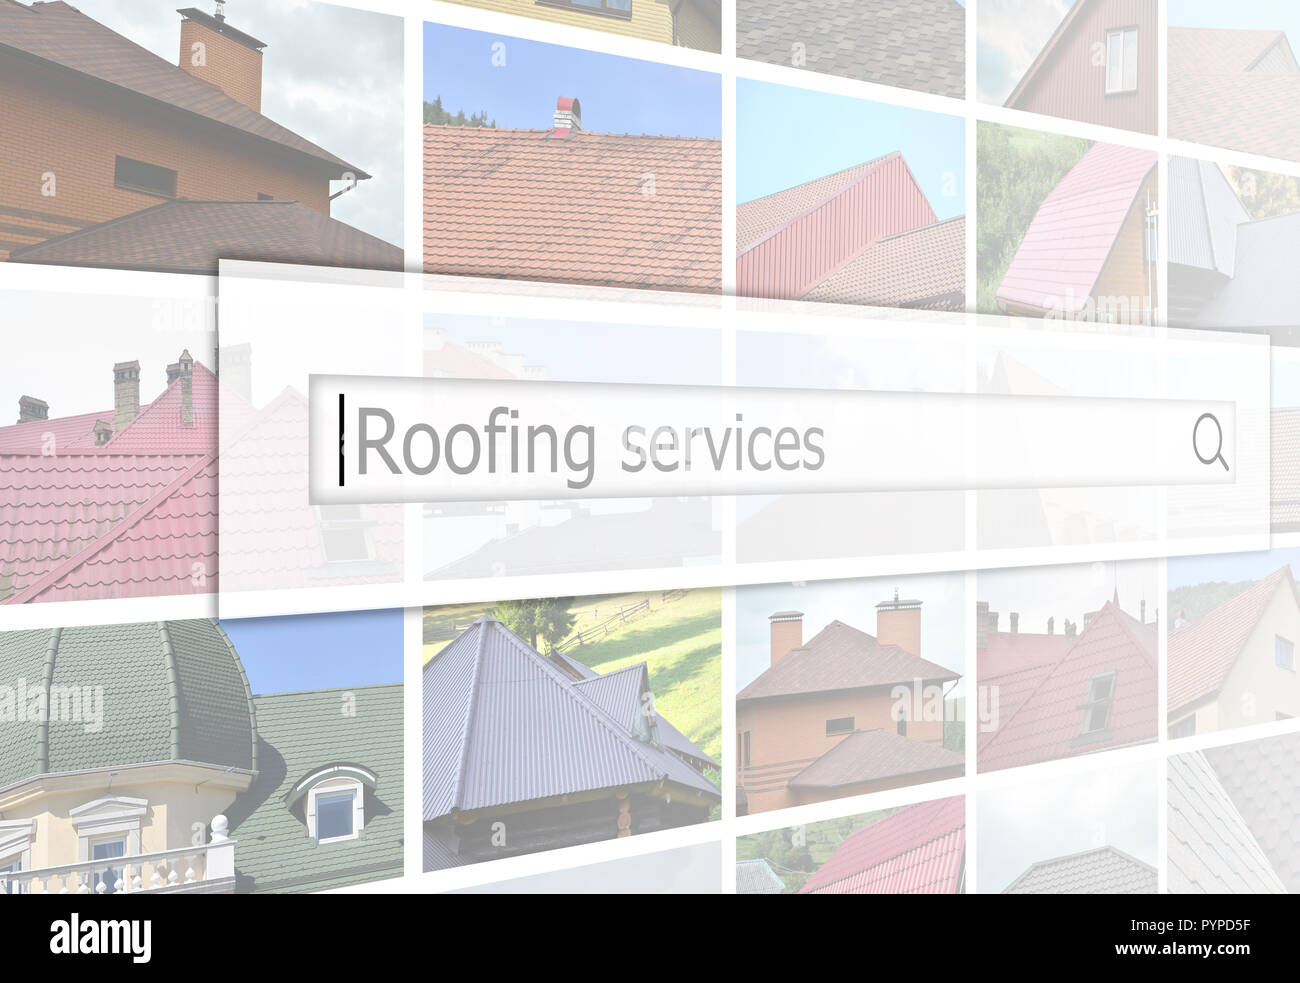 anderson roofing company inc
Roofing